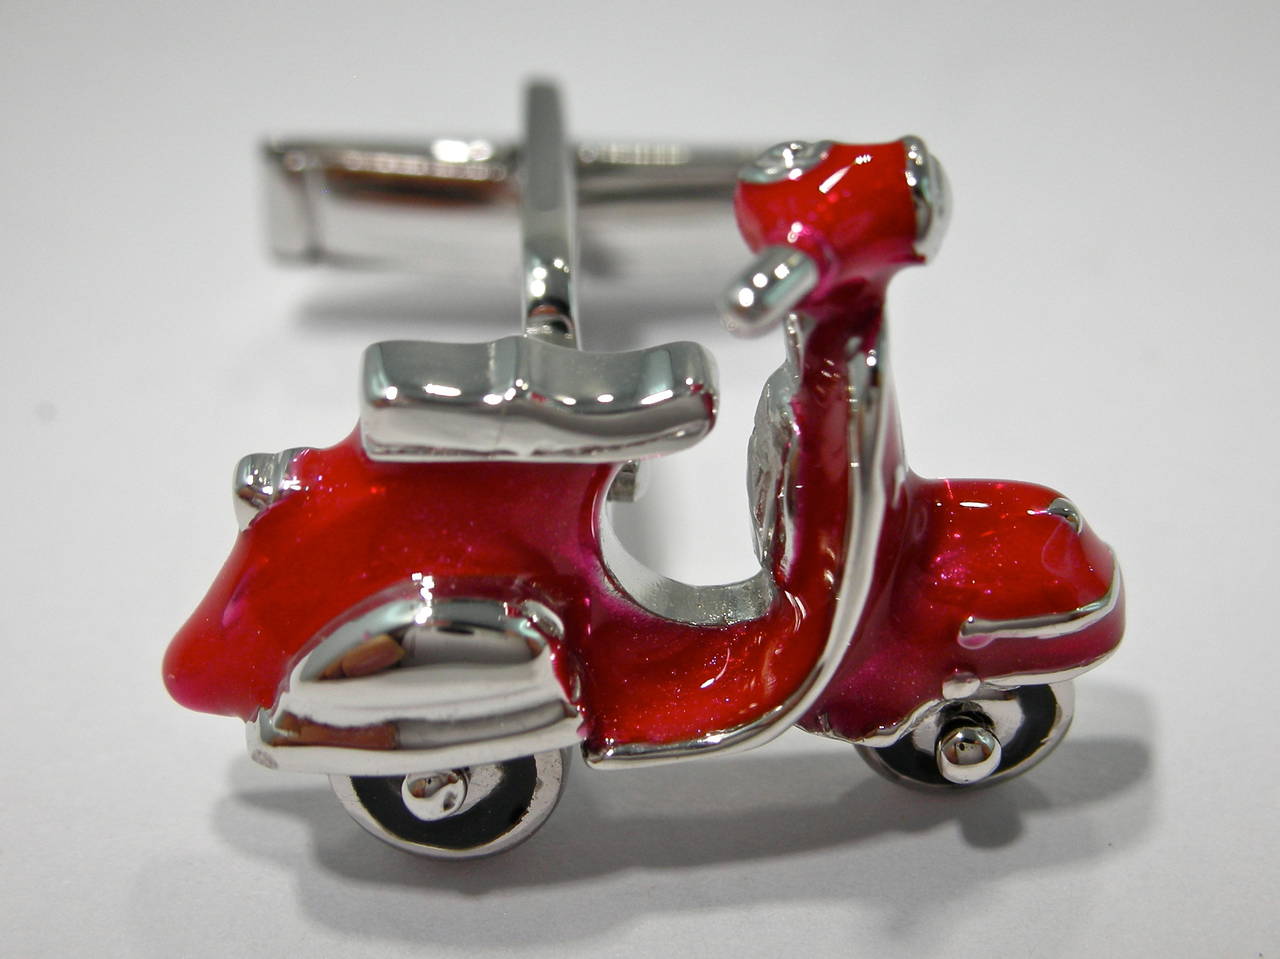 Enameled sterling silver scooter cufflinks by Jona with rotating wheels.

All of our jewelry is new and has never been previously owned or worn.